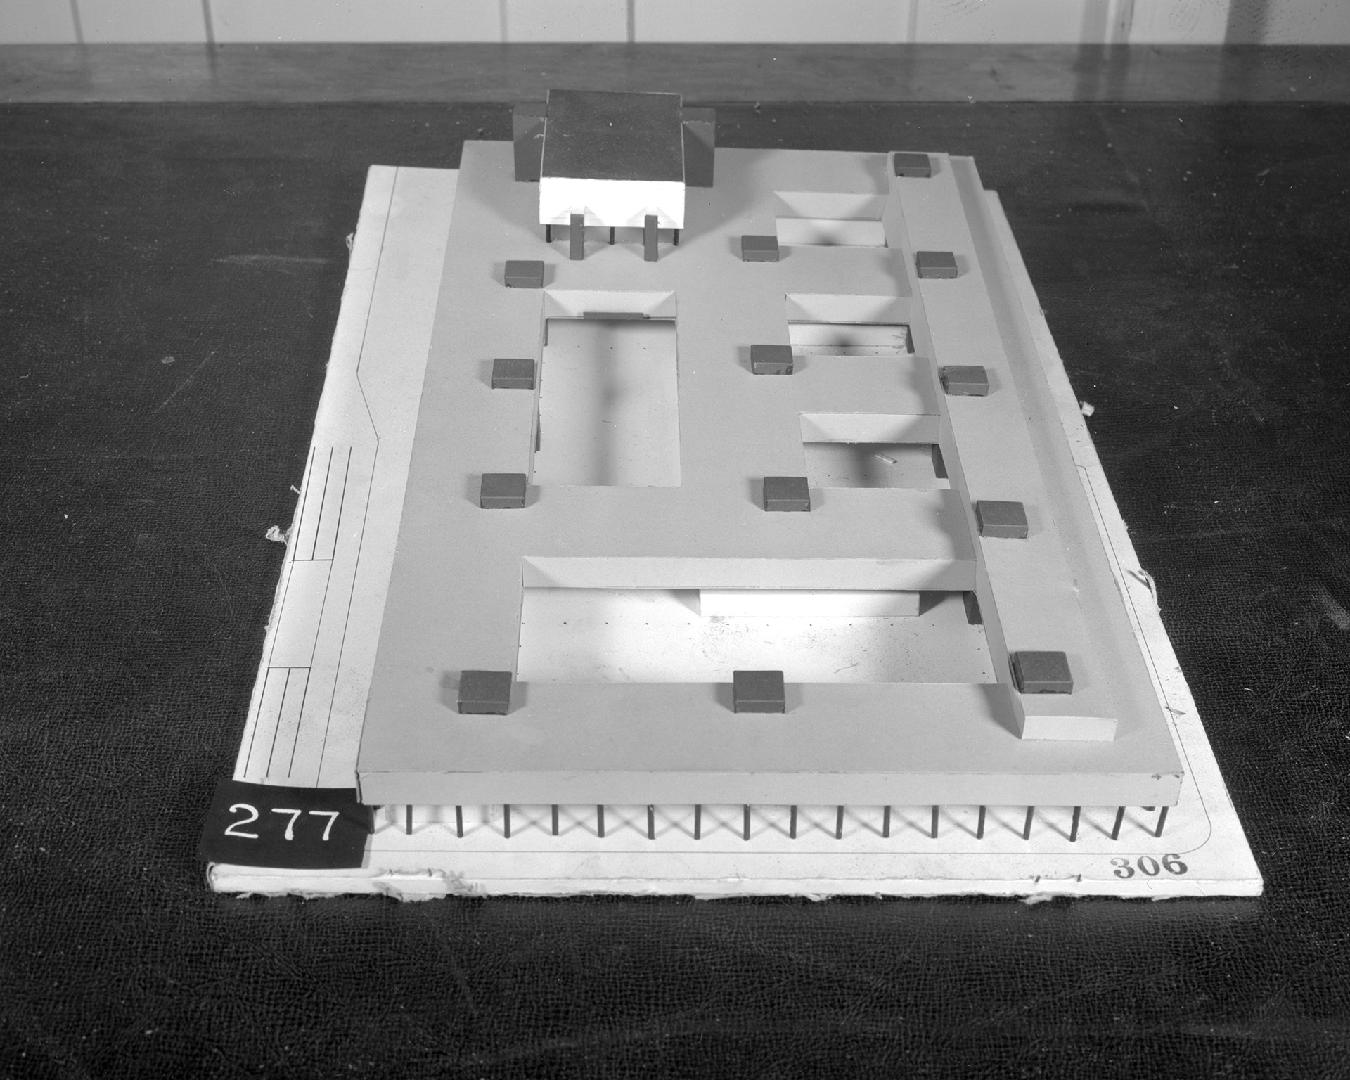 H. V. Andersen entry, City Hall and Square Competition, Toronto, 1958, architectural model